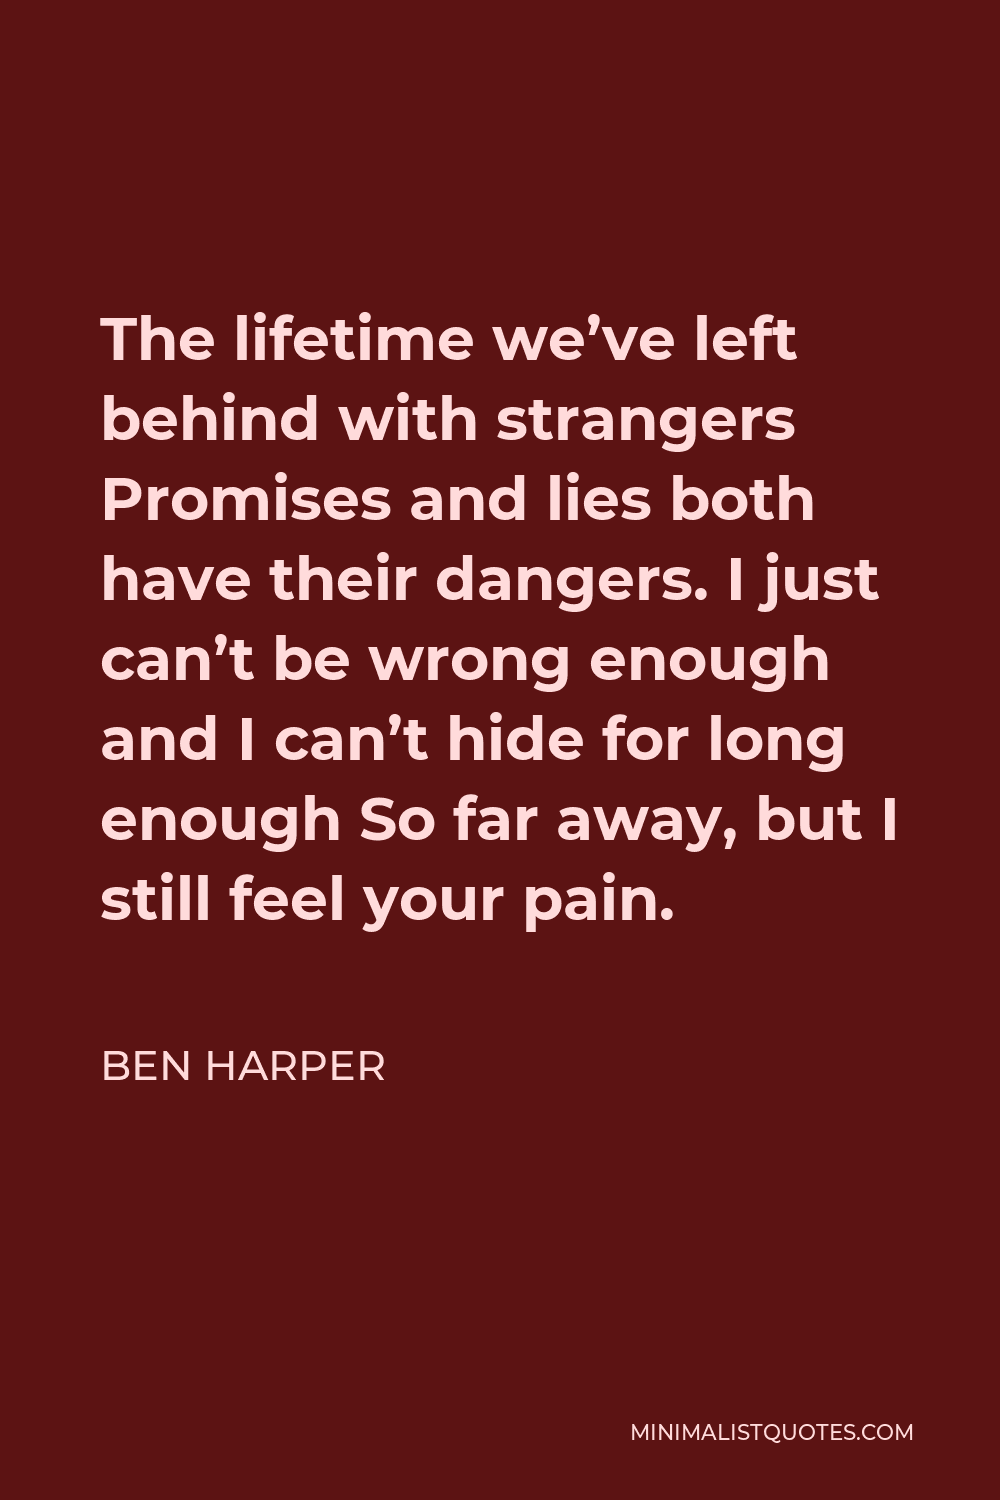 Ben Harper Quote - The lifetime we’ve left behind with strangers Promises and lies both have their dangers. I just can’t be wrong enough and I can’t hide for long enough So far away, but I still feel your pain.